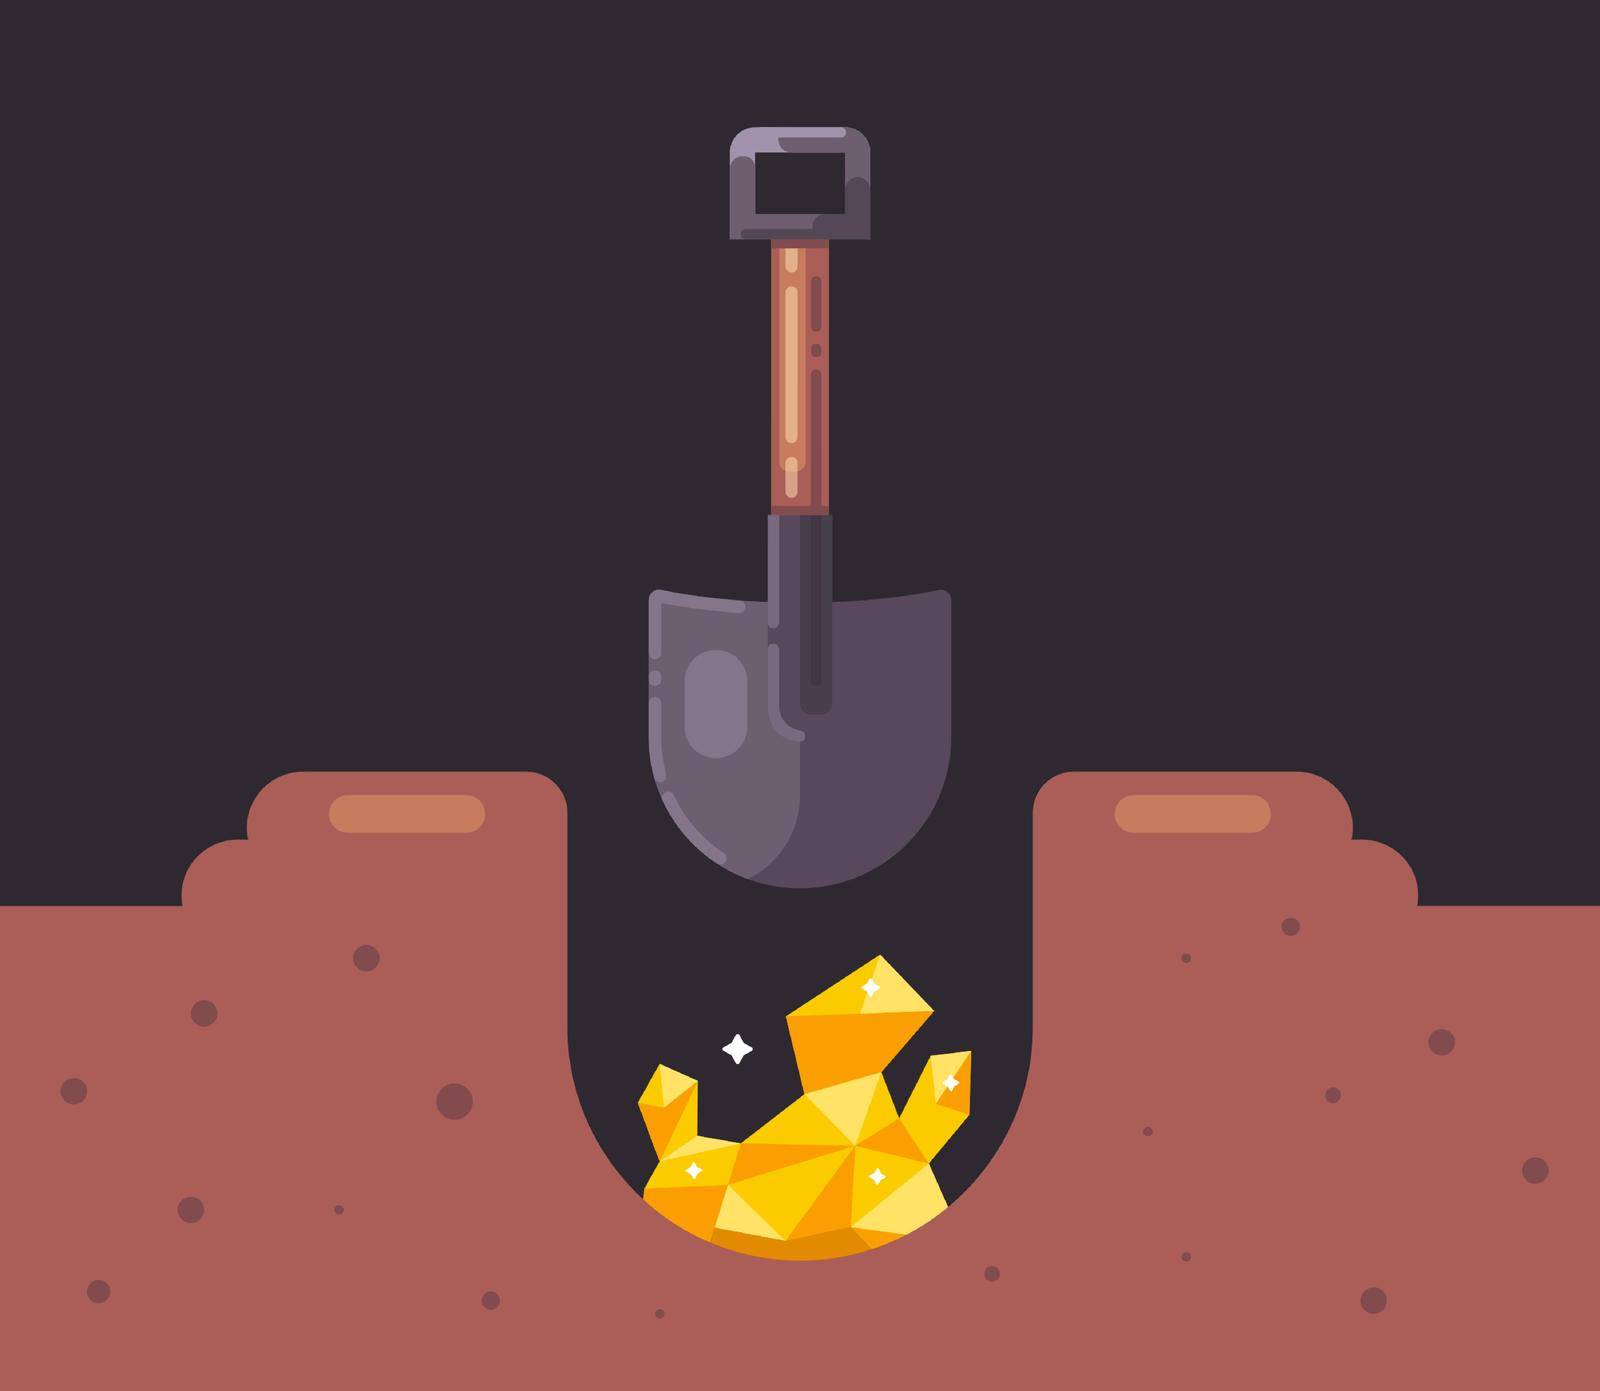 dig a hole with a shovel and find gold. treasure hunt in the earth. flat vector illustration.